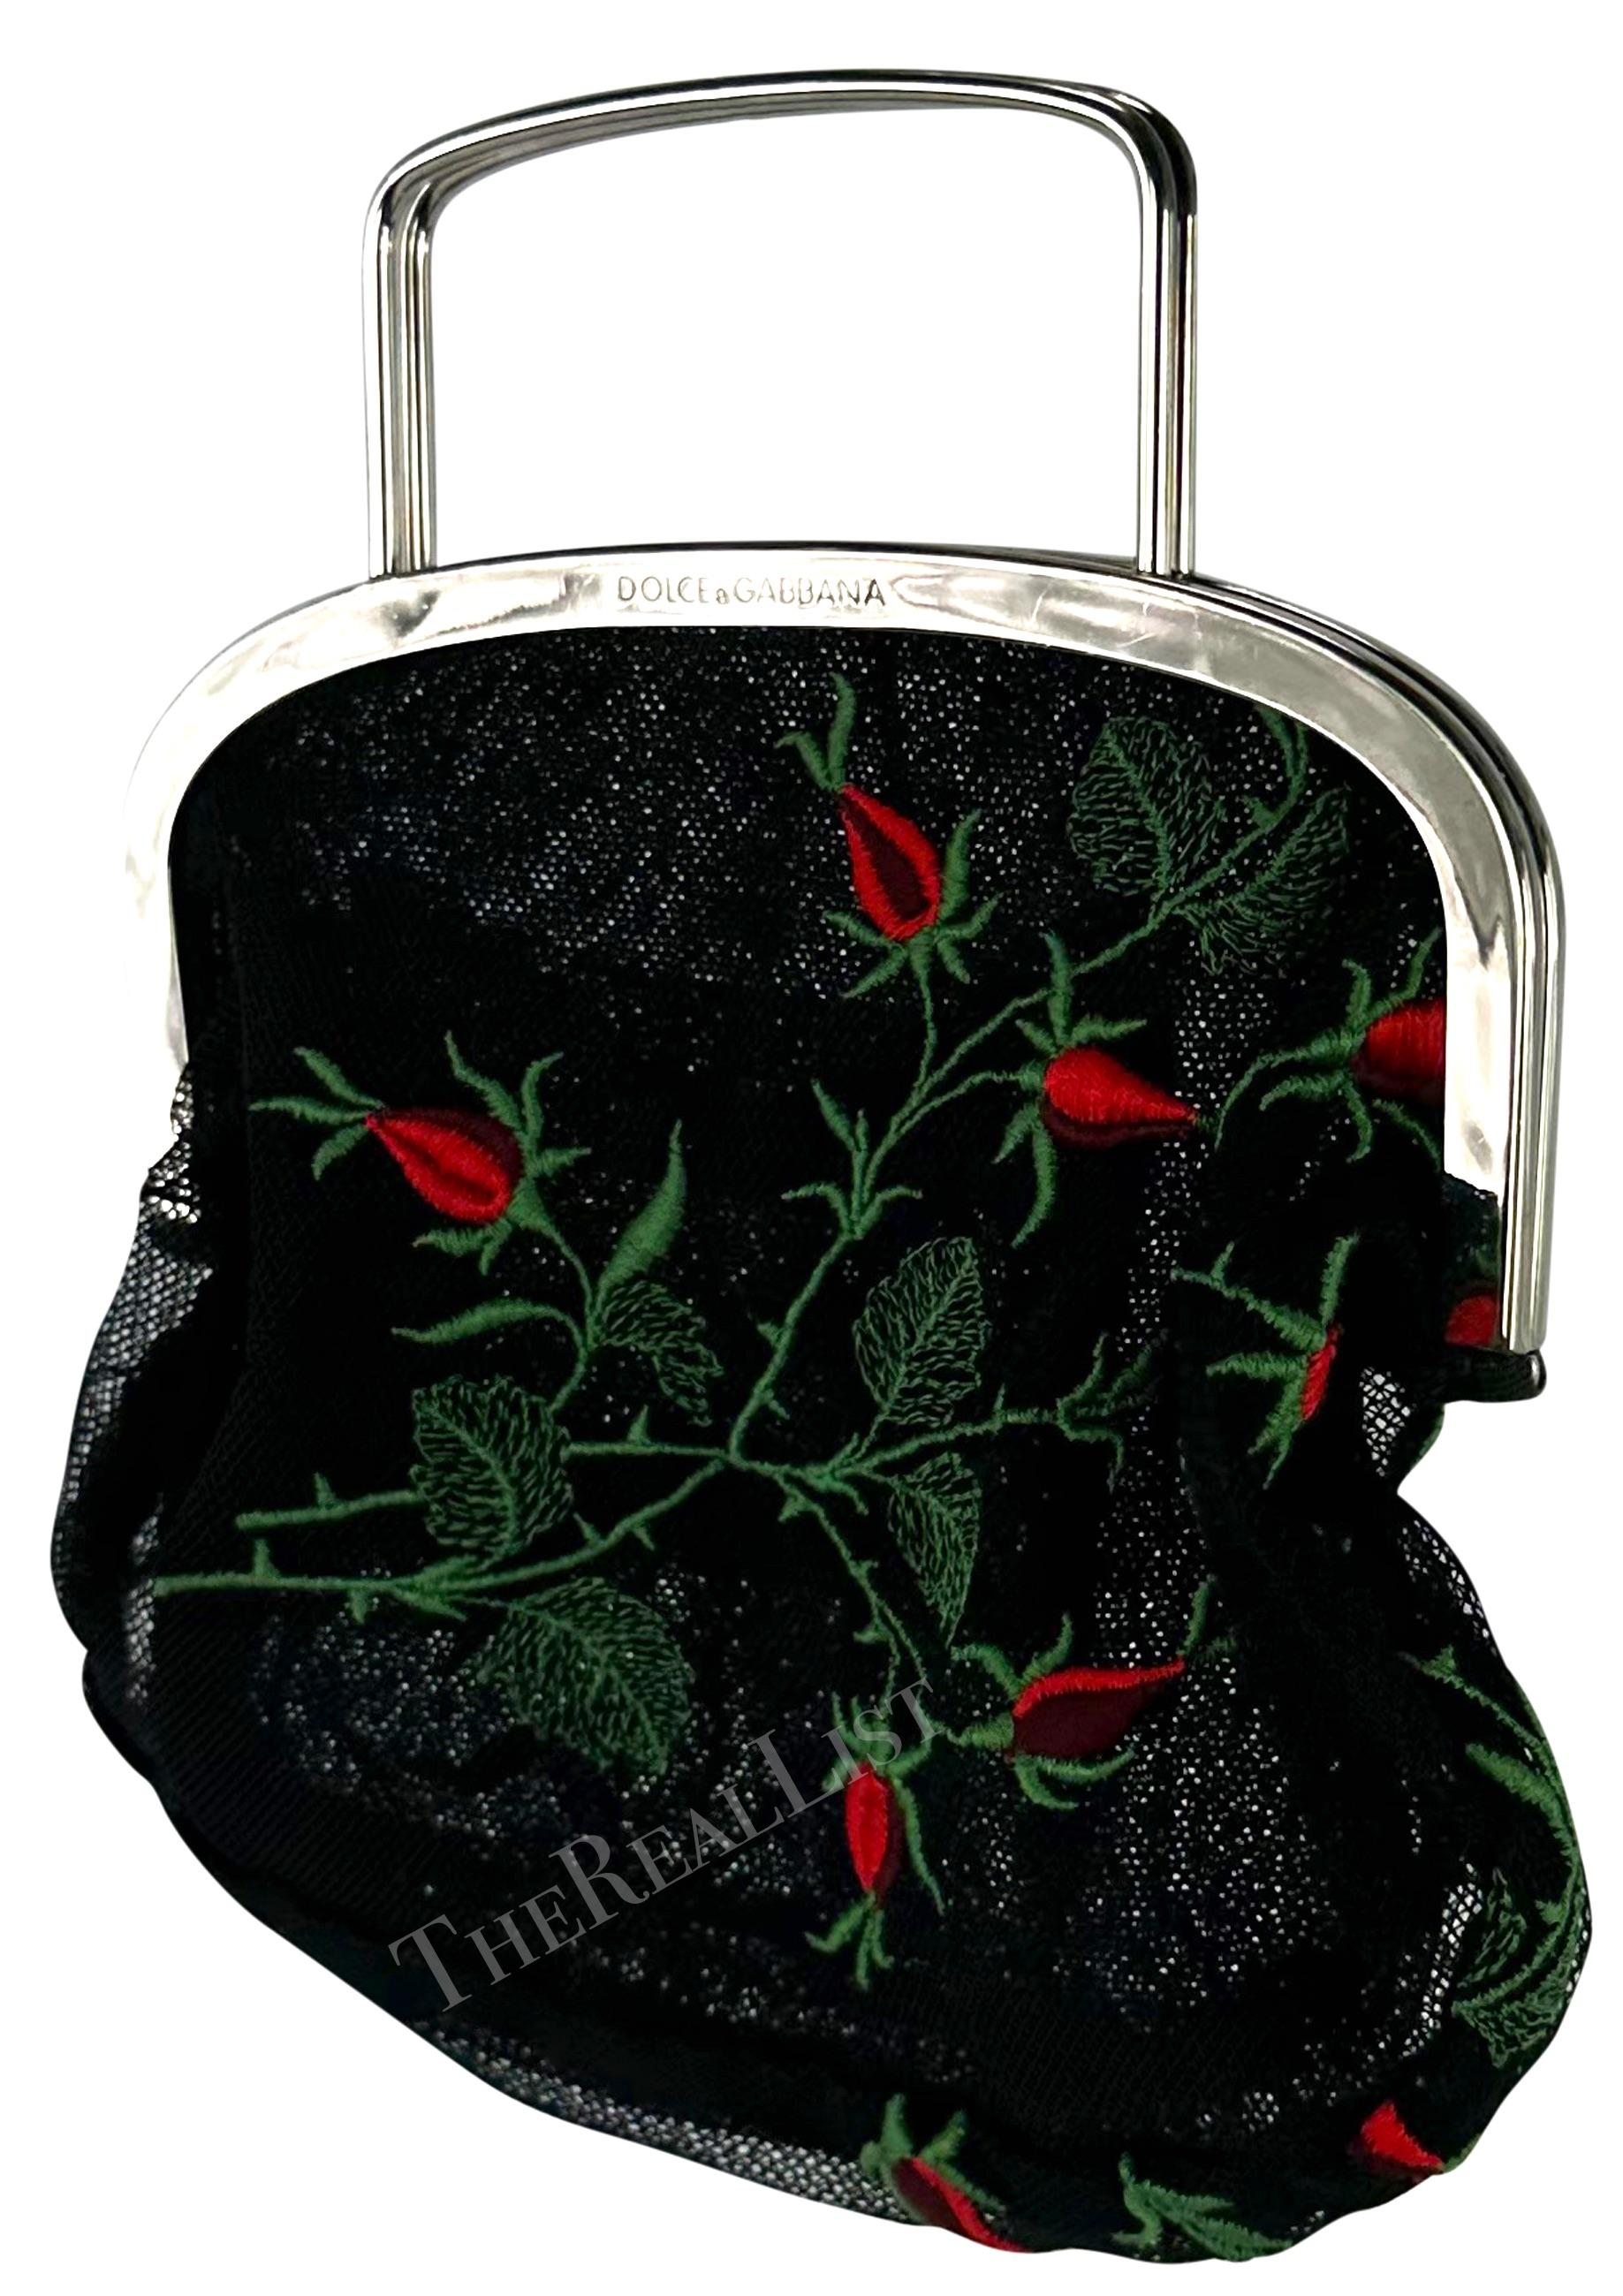 A fabulous black mesh Dolce & Gabbana mini bag from the 1990s. This petite evening bag is crafted from semi-sheer black mesh adorned with a striking red floral print. The bag is made complete with a silver-tone closure and handle. 

Approximate